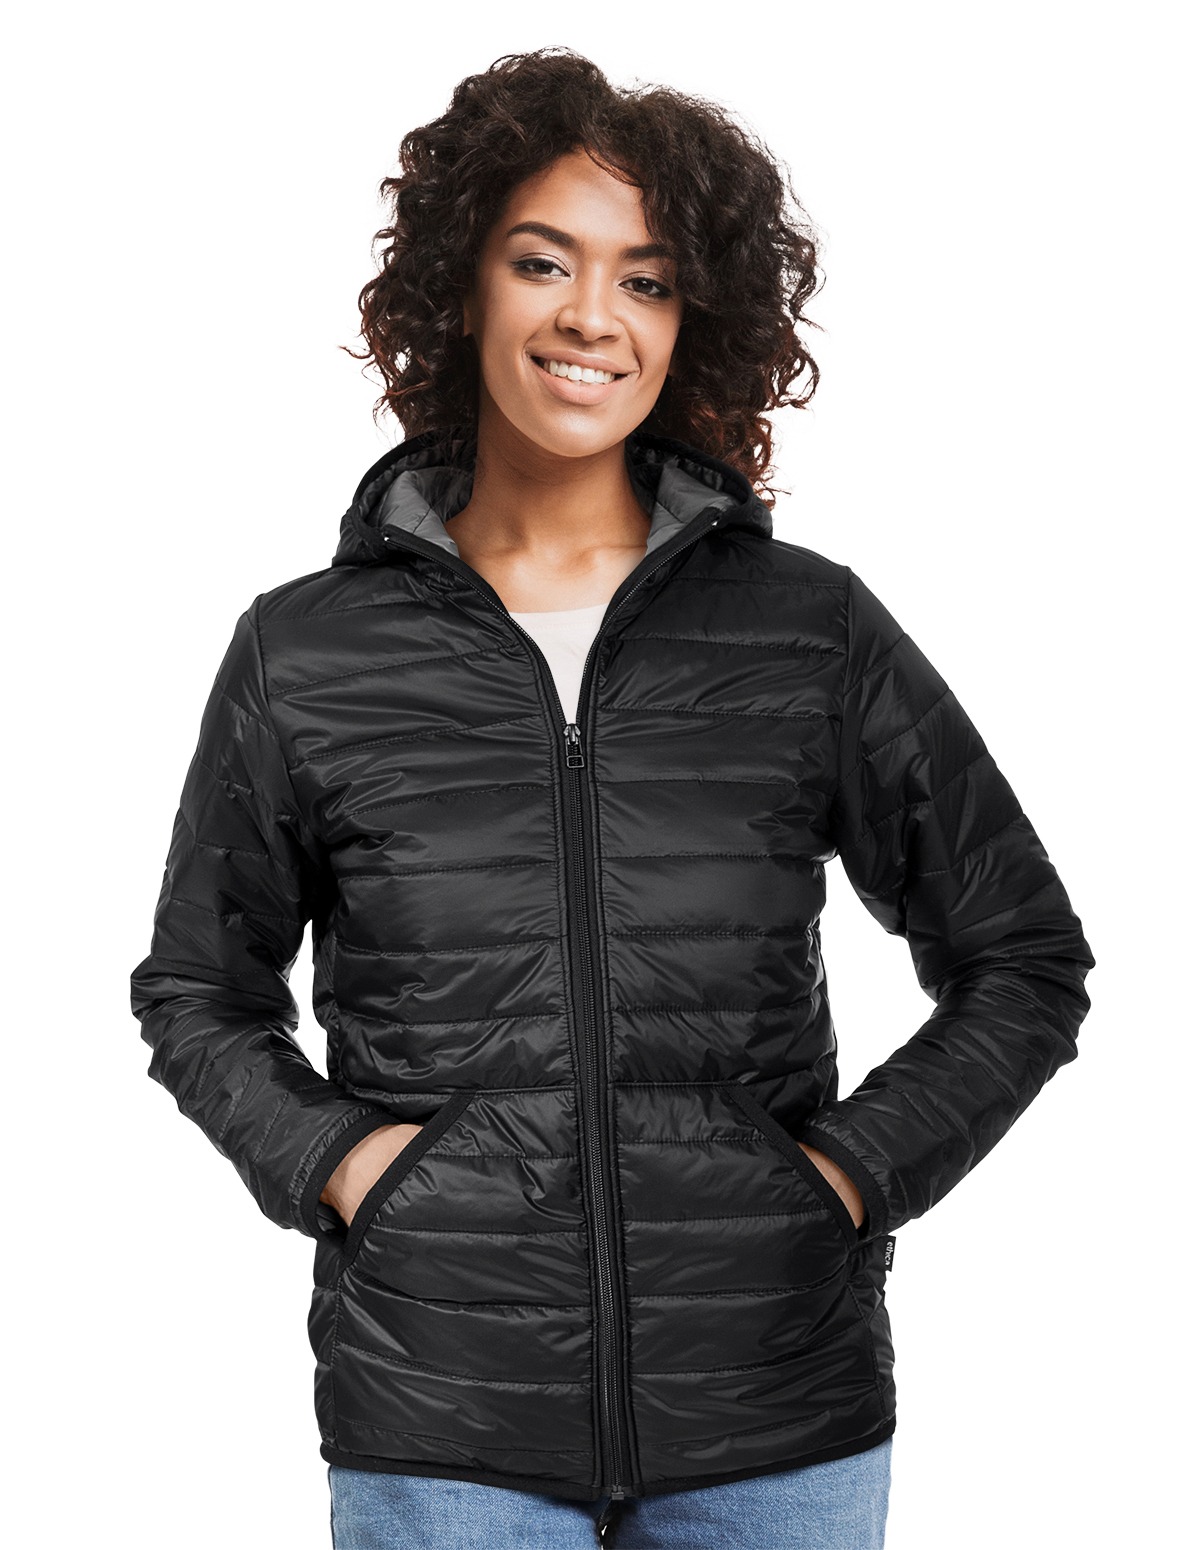 Hooded quilted jacket women